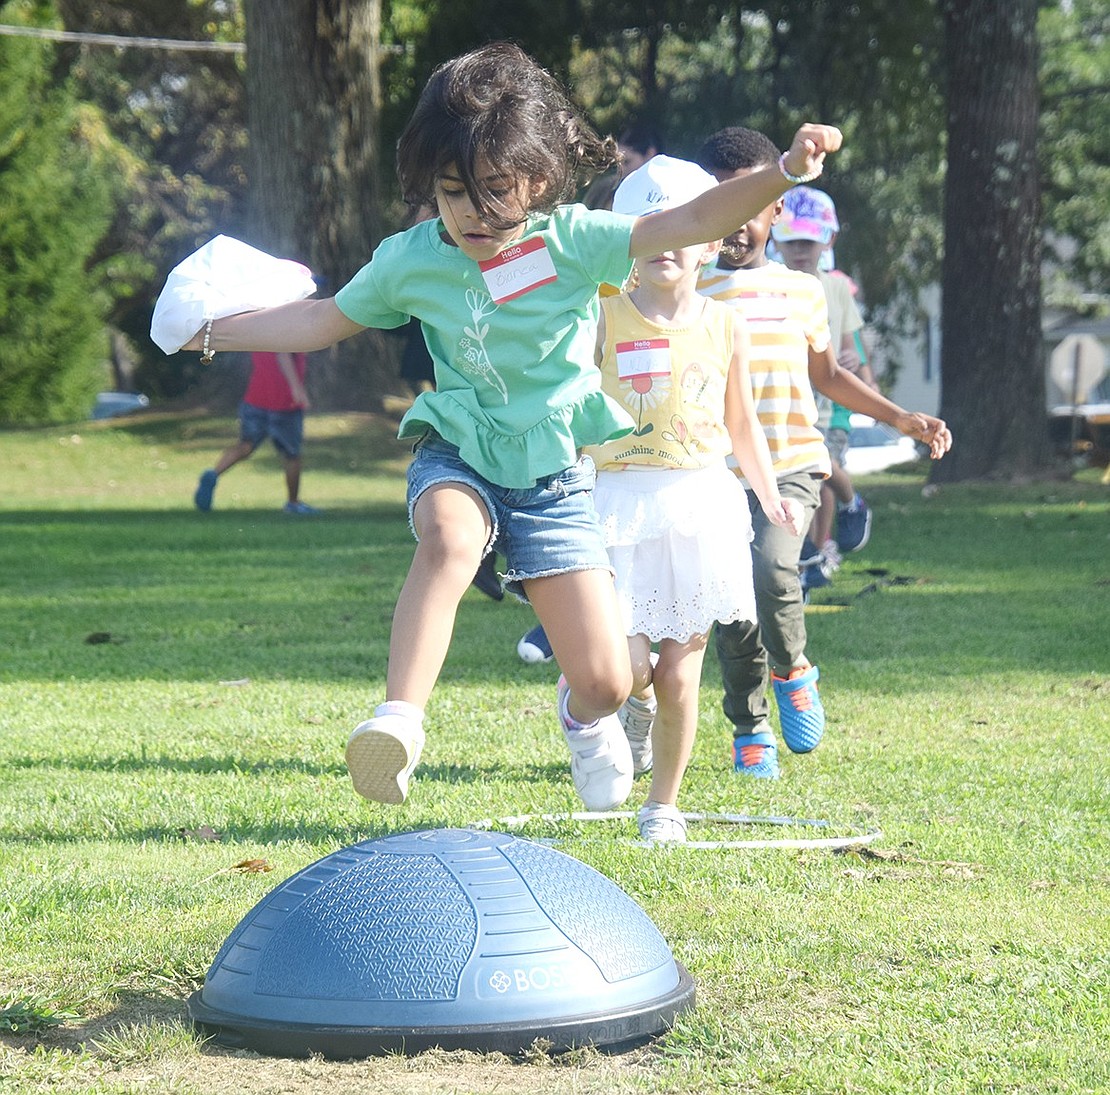 Bianca Ciardullo, a future student in Karen Johnson’s class, lets her competitive edge shine as she hops over a balance trainer set up on the route of an obstacle course.